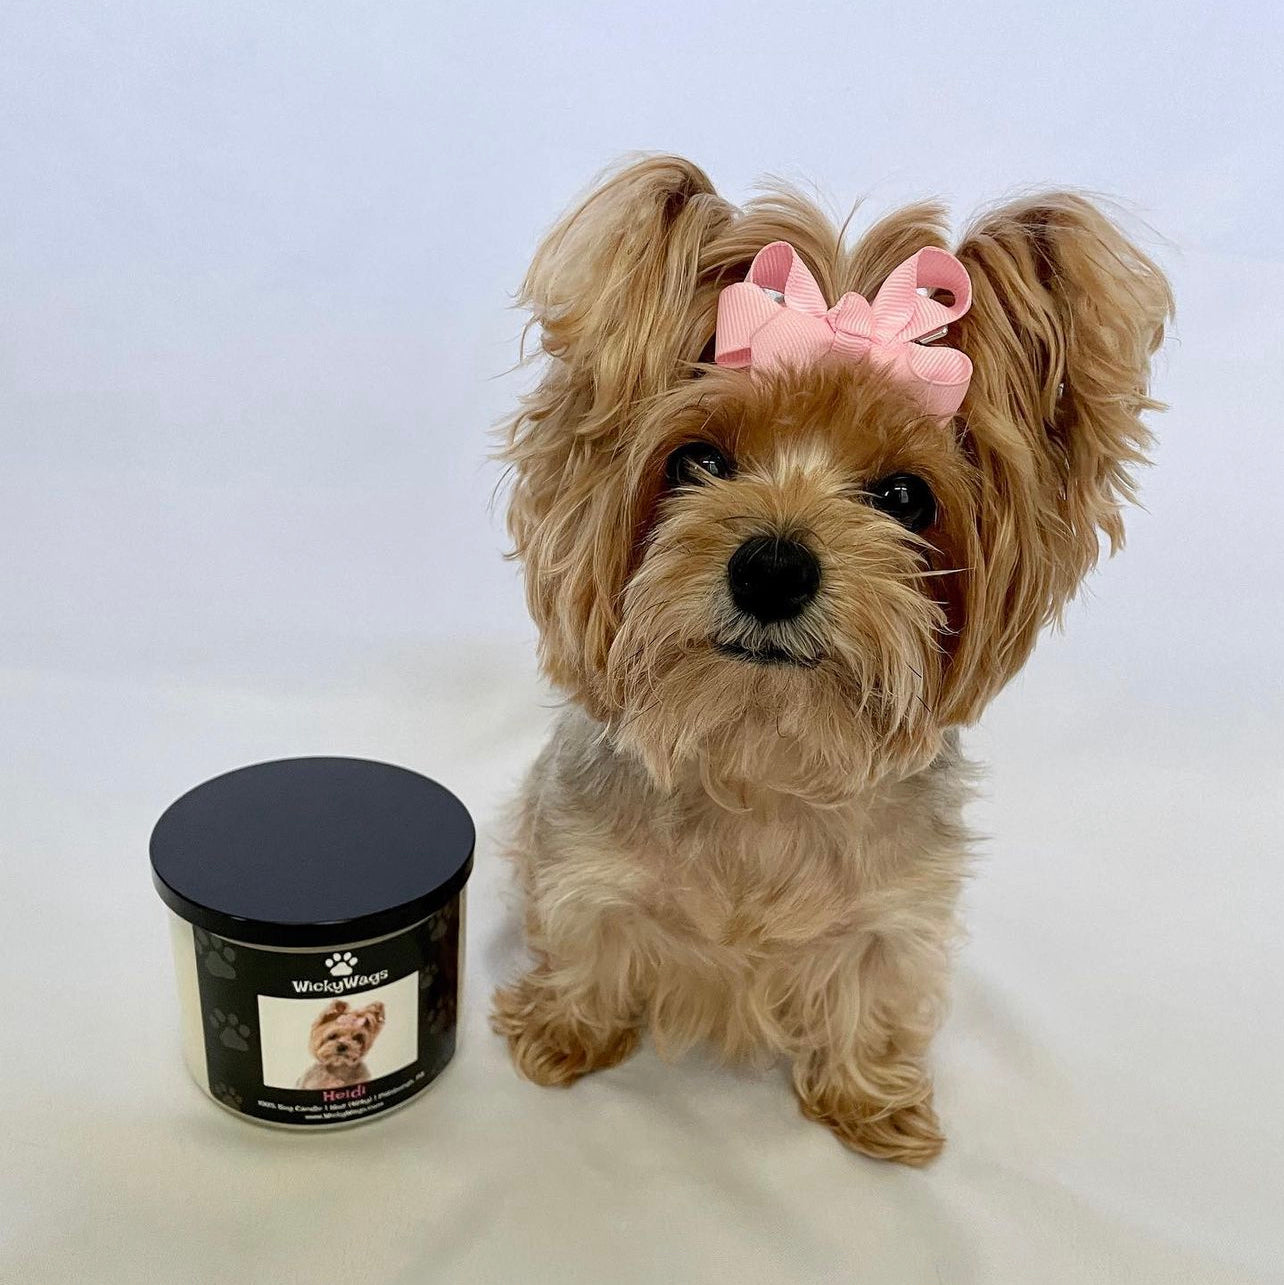 Heidi the dog next to her very own custom candle.